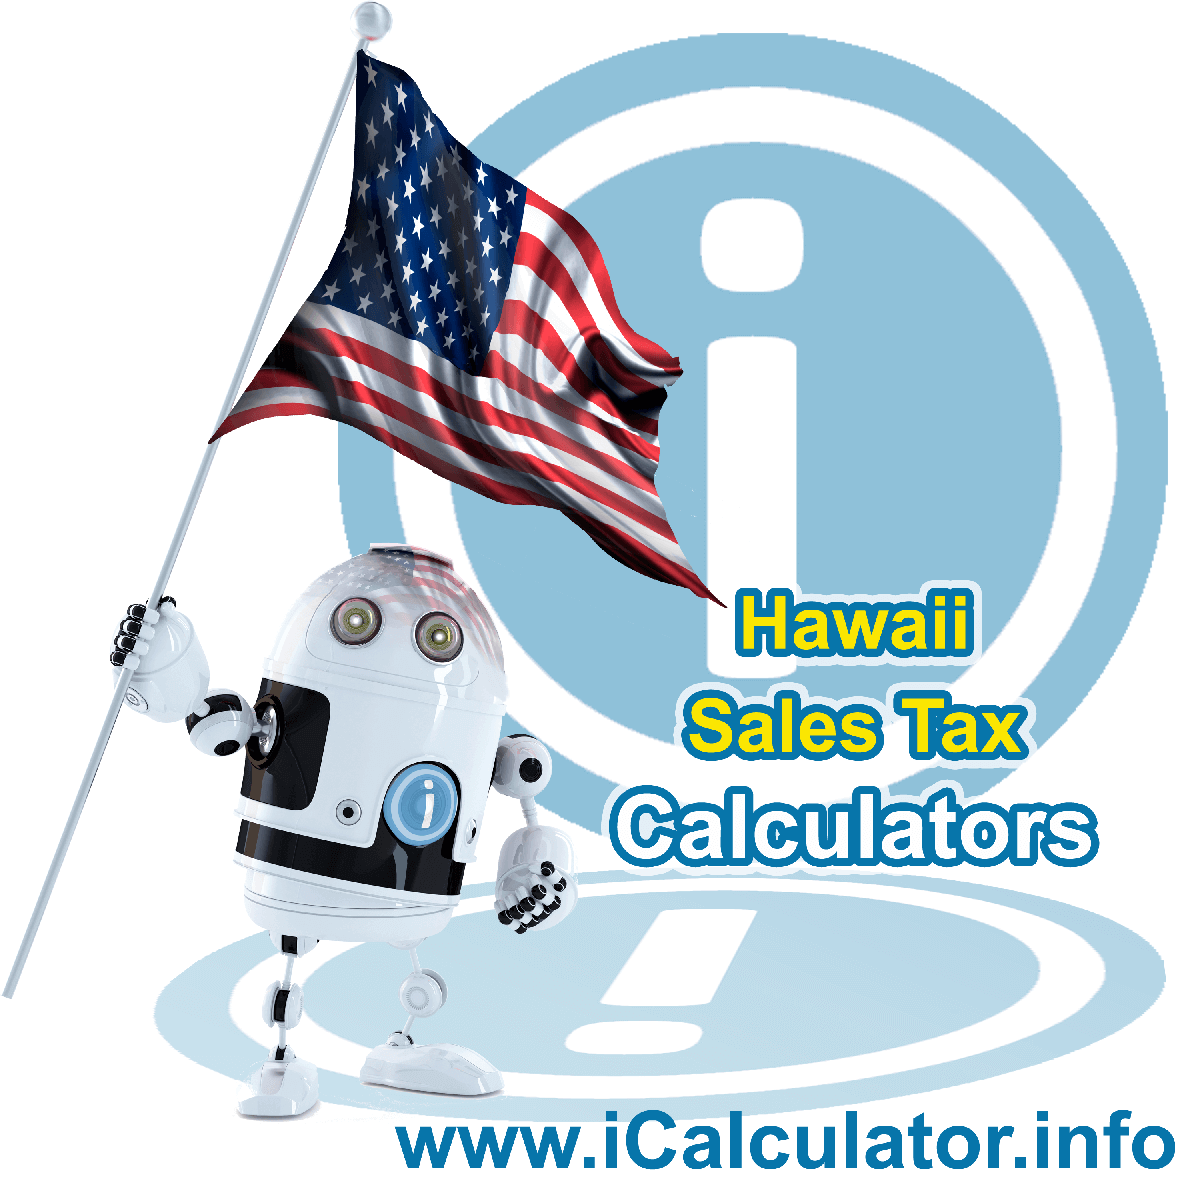 Kihei Sales Rates: This image illustrates a calculator robot calculating Kihei sales tax manually using the Kihei Sales Tax Formula. You can use this information to calculate Kihei Sales Tax manually or use the Kihei Sales Tax Calculator to calculate sales tax online.